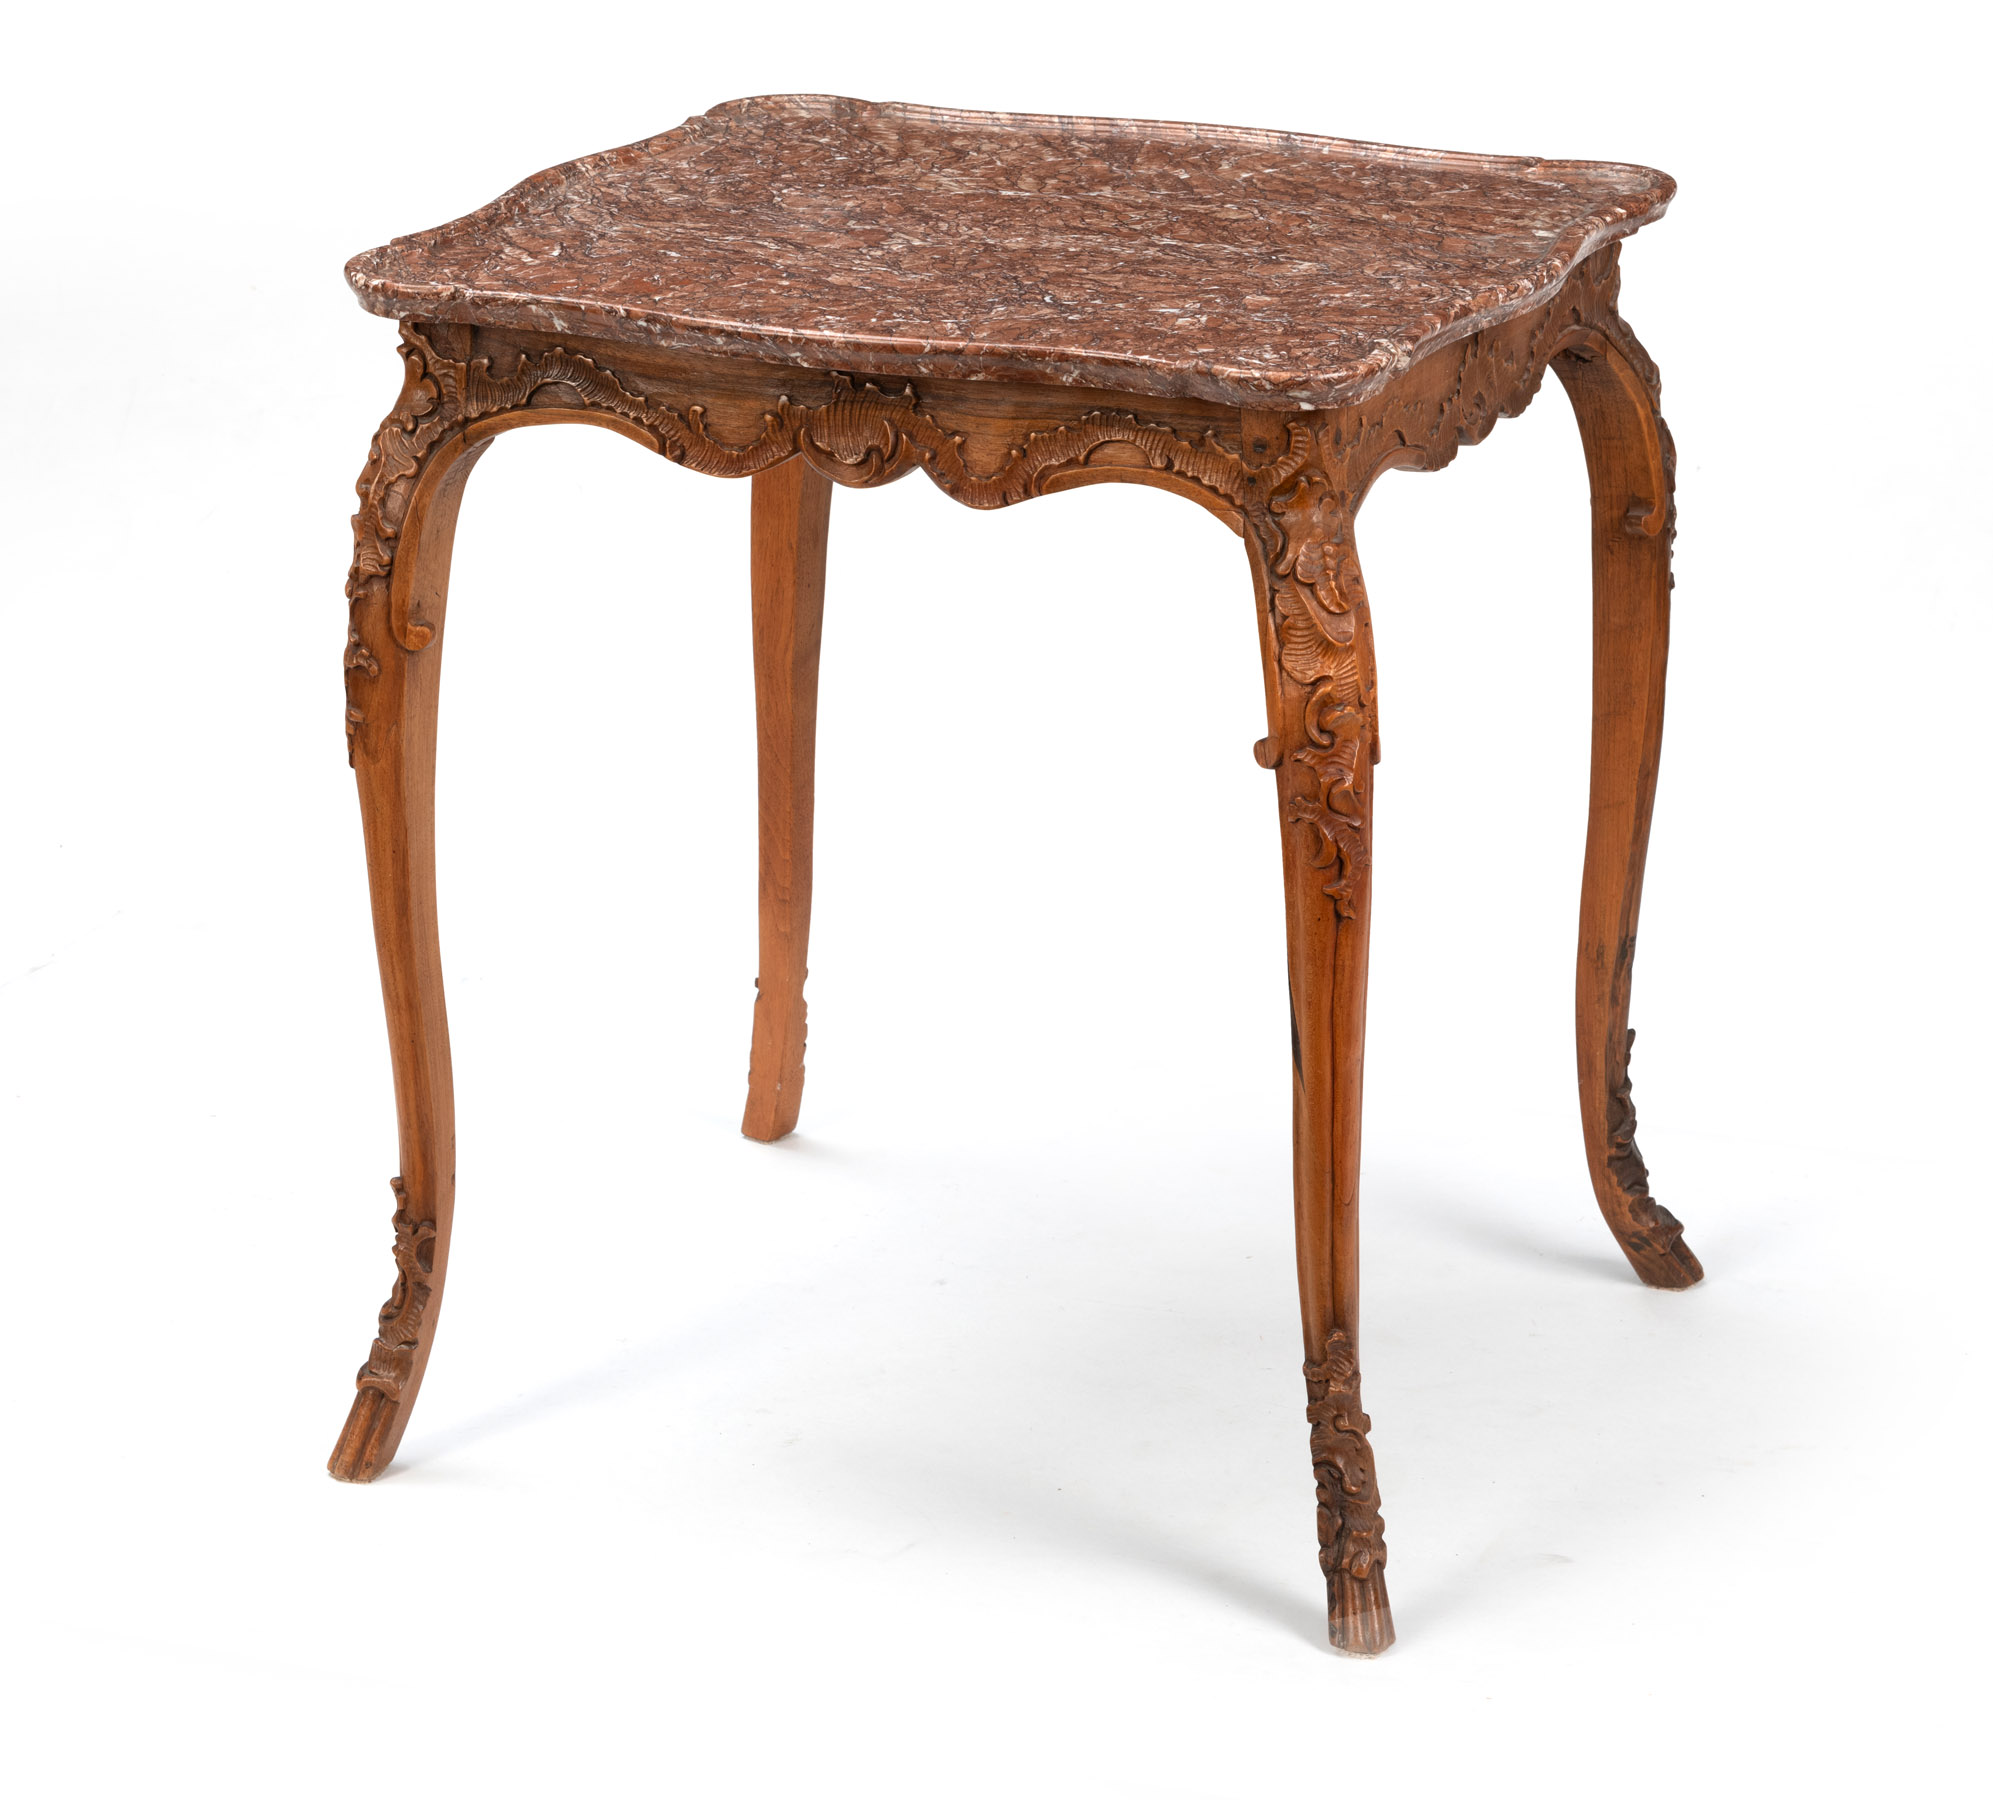 A SMALL CARVED WALNUT ROCOCO TABLE - Image 2 of 4